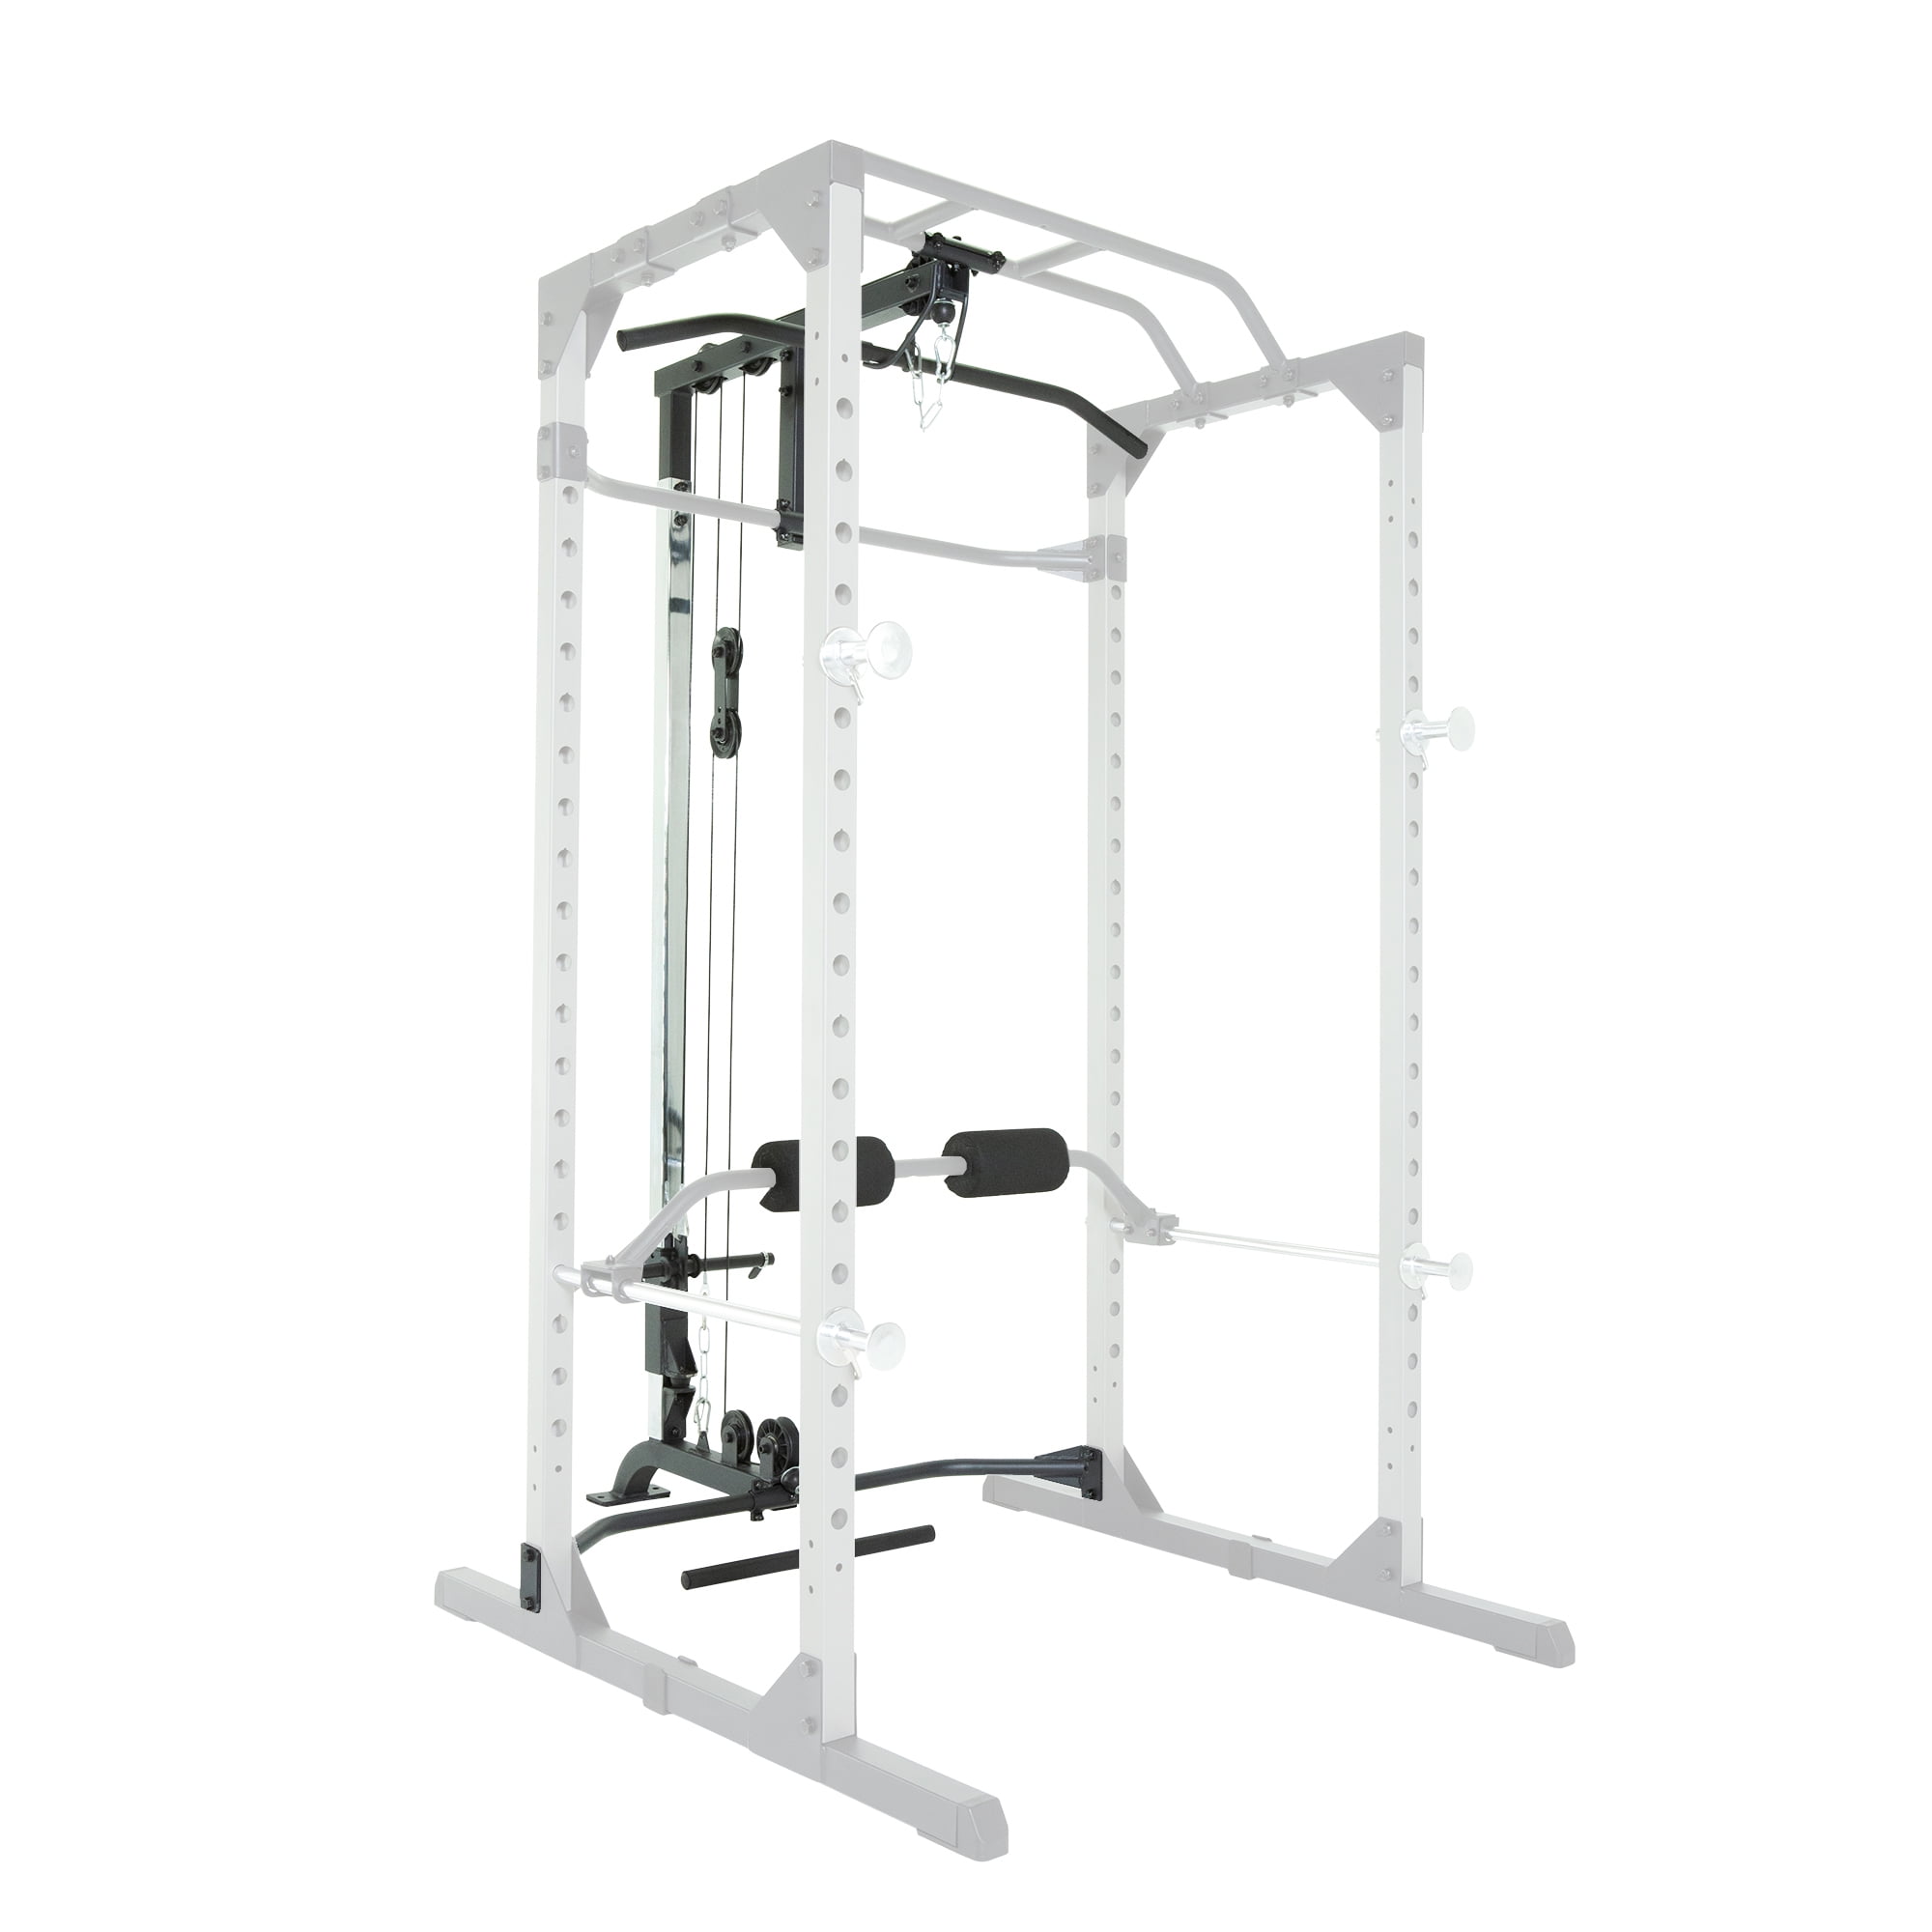 Simple Lat Pulldown Attachment Set with Comfort Workout Clothes